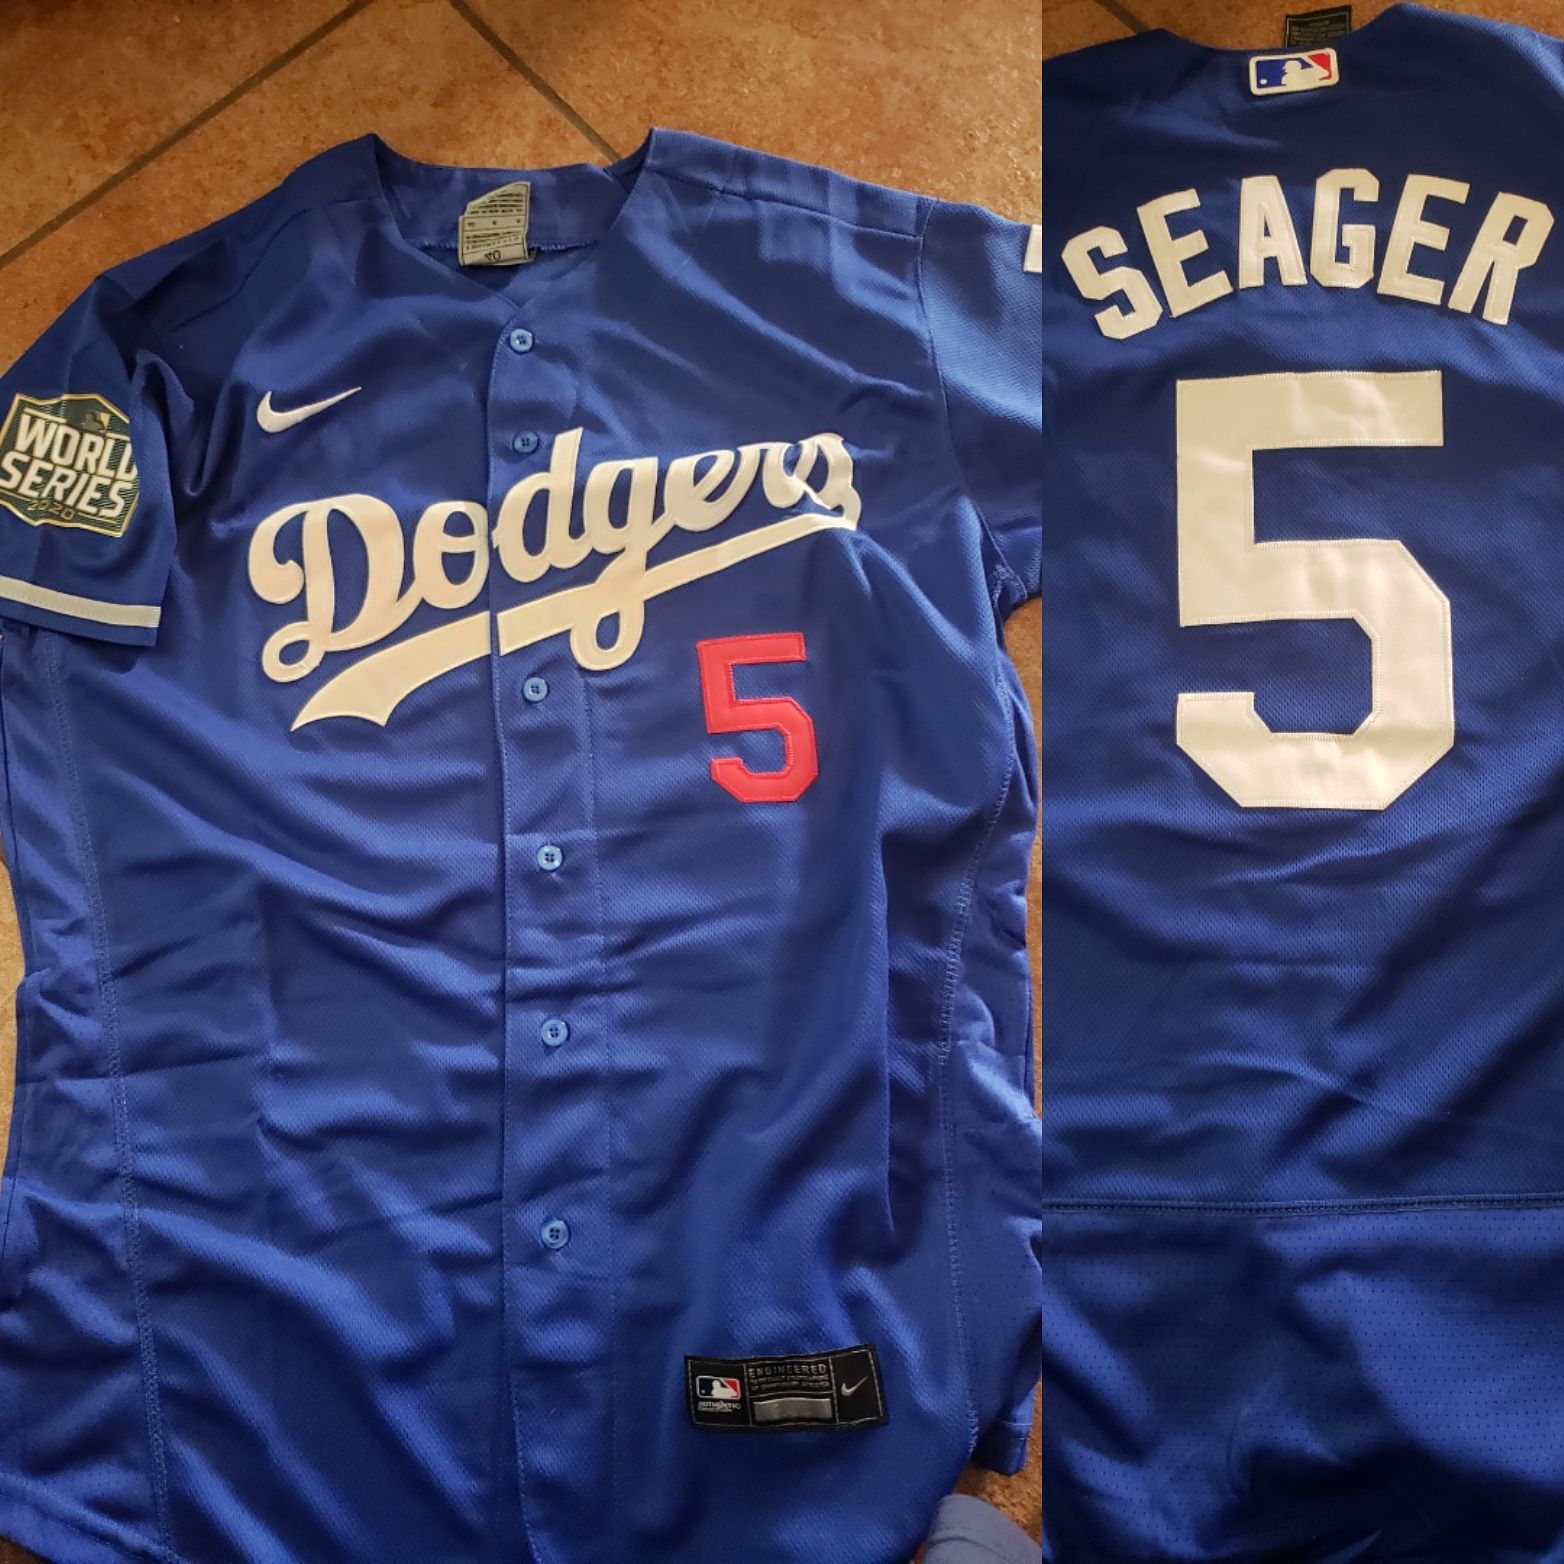 Dodgers seager jersey with World Series patch size medium to 3xl stitched firm price pick up only